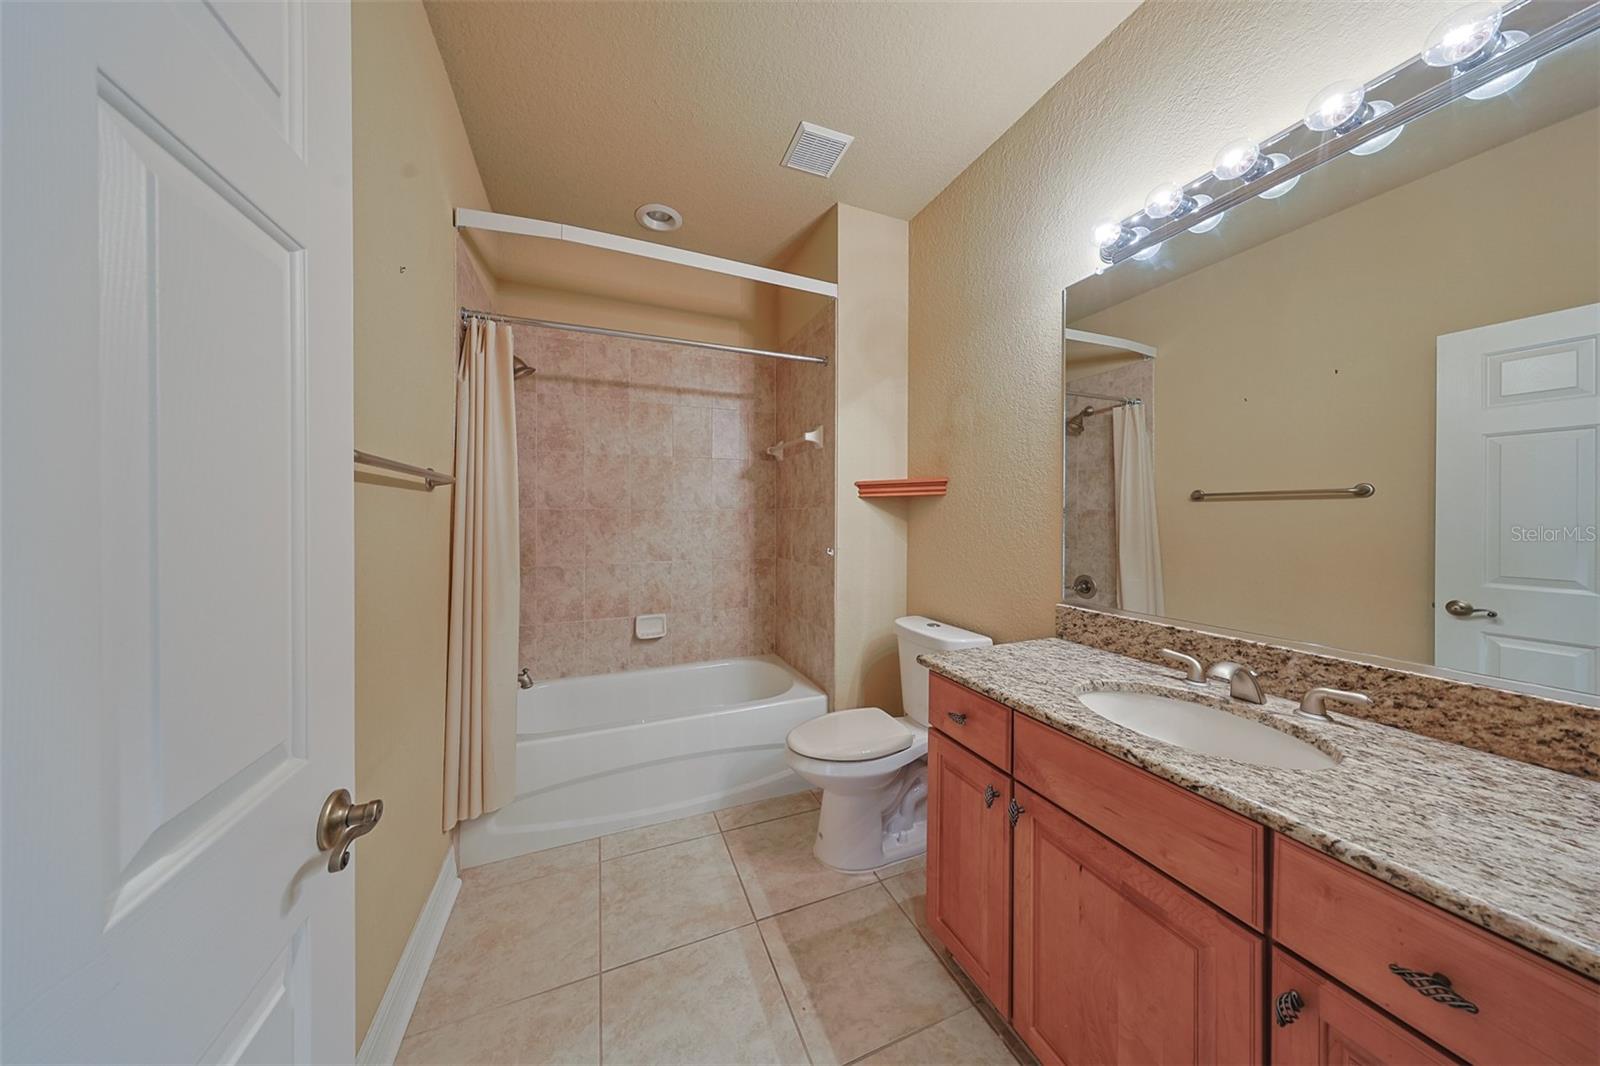 Guest Bathroom with shower and tub is sparkling clean, neat and handsome.  Again, with matching cabinets and granite countertops.